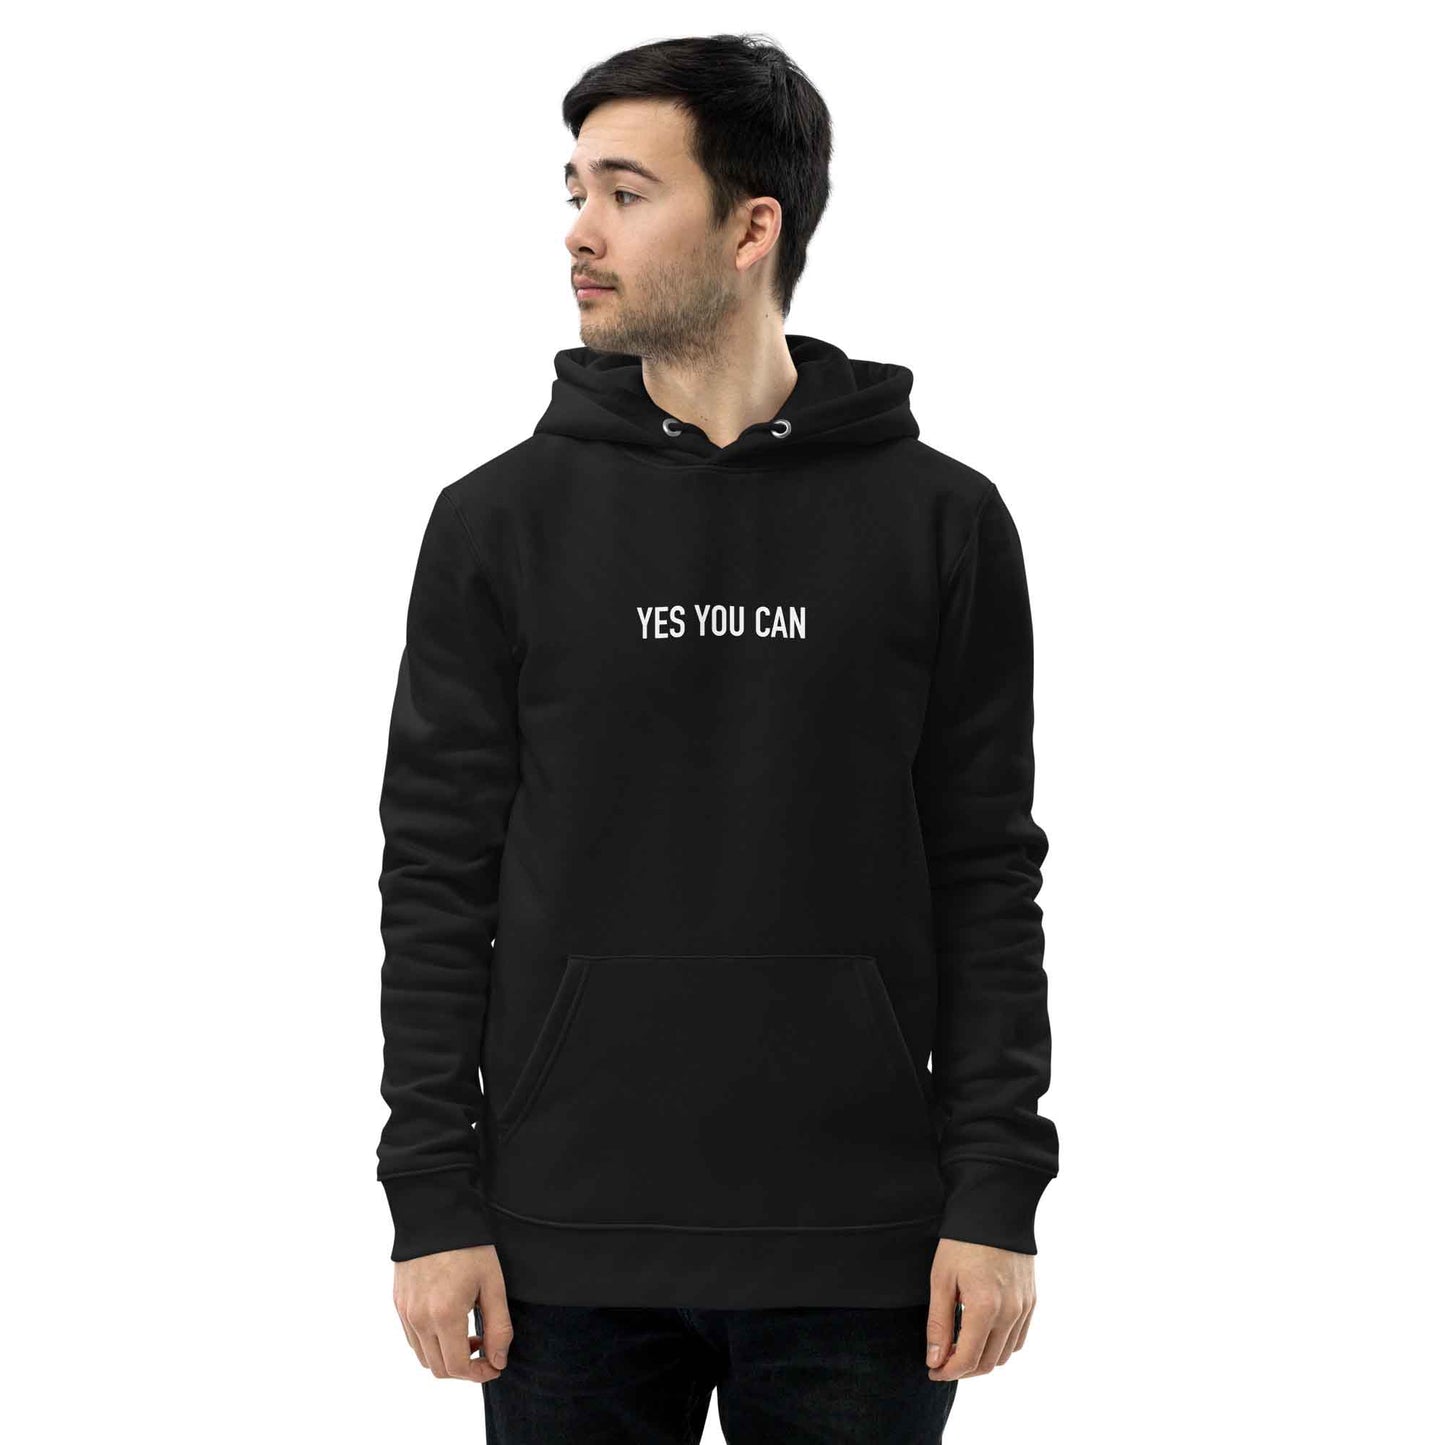 Men black organic cotton hoodie with inspirational quote, "Yes You Can."